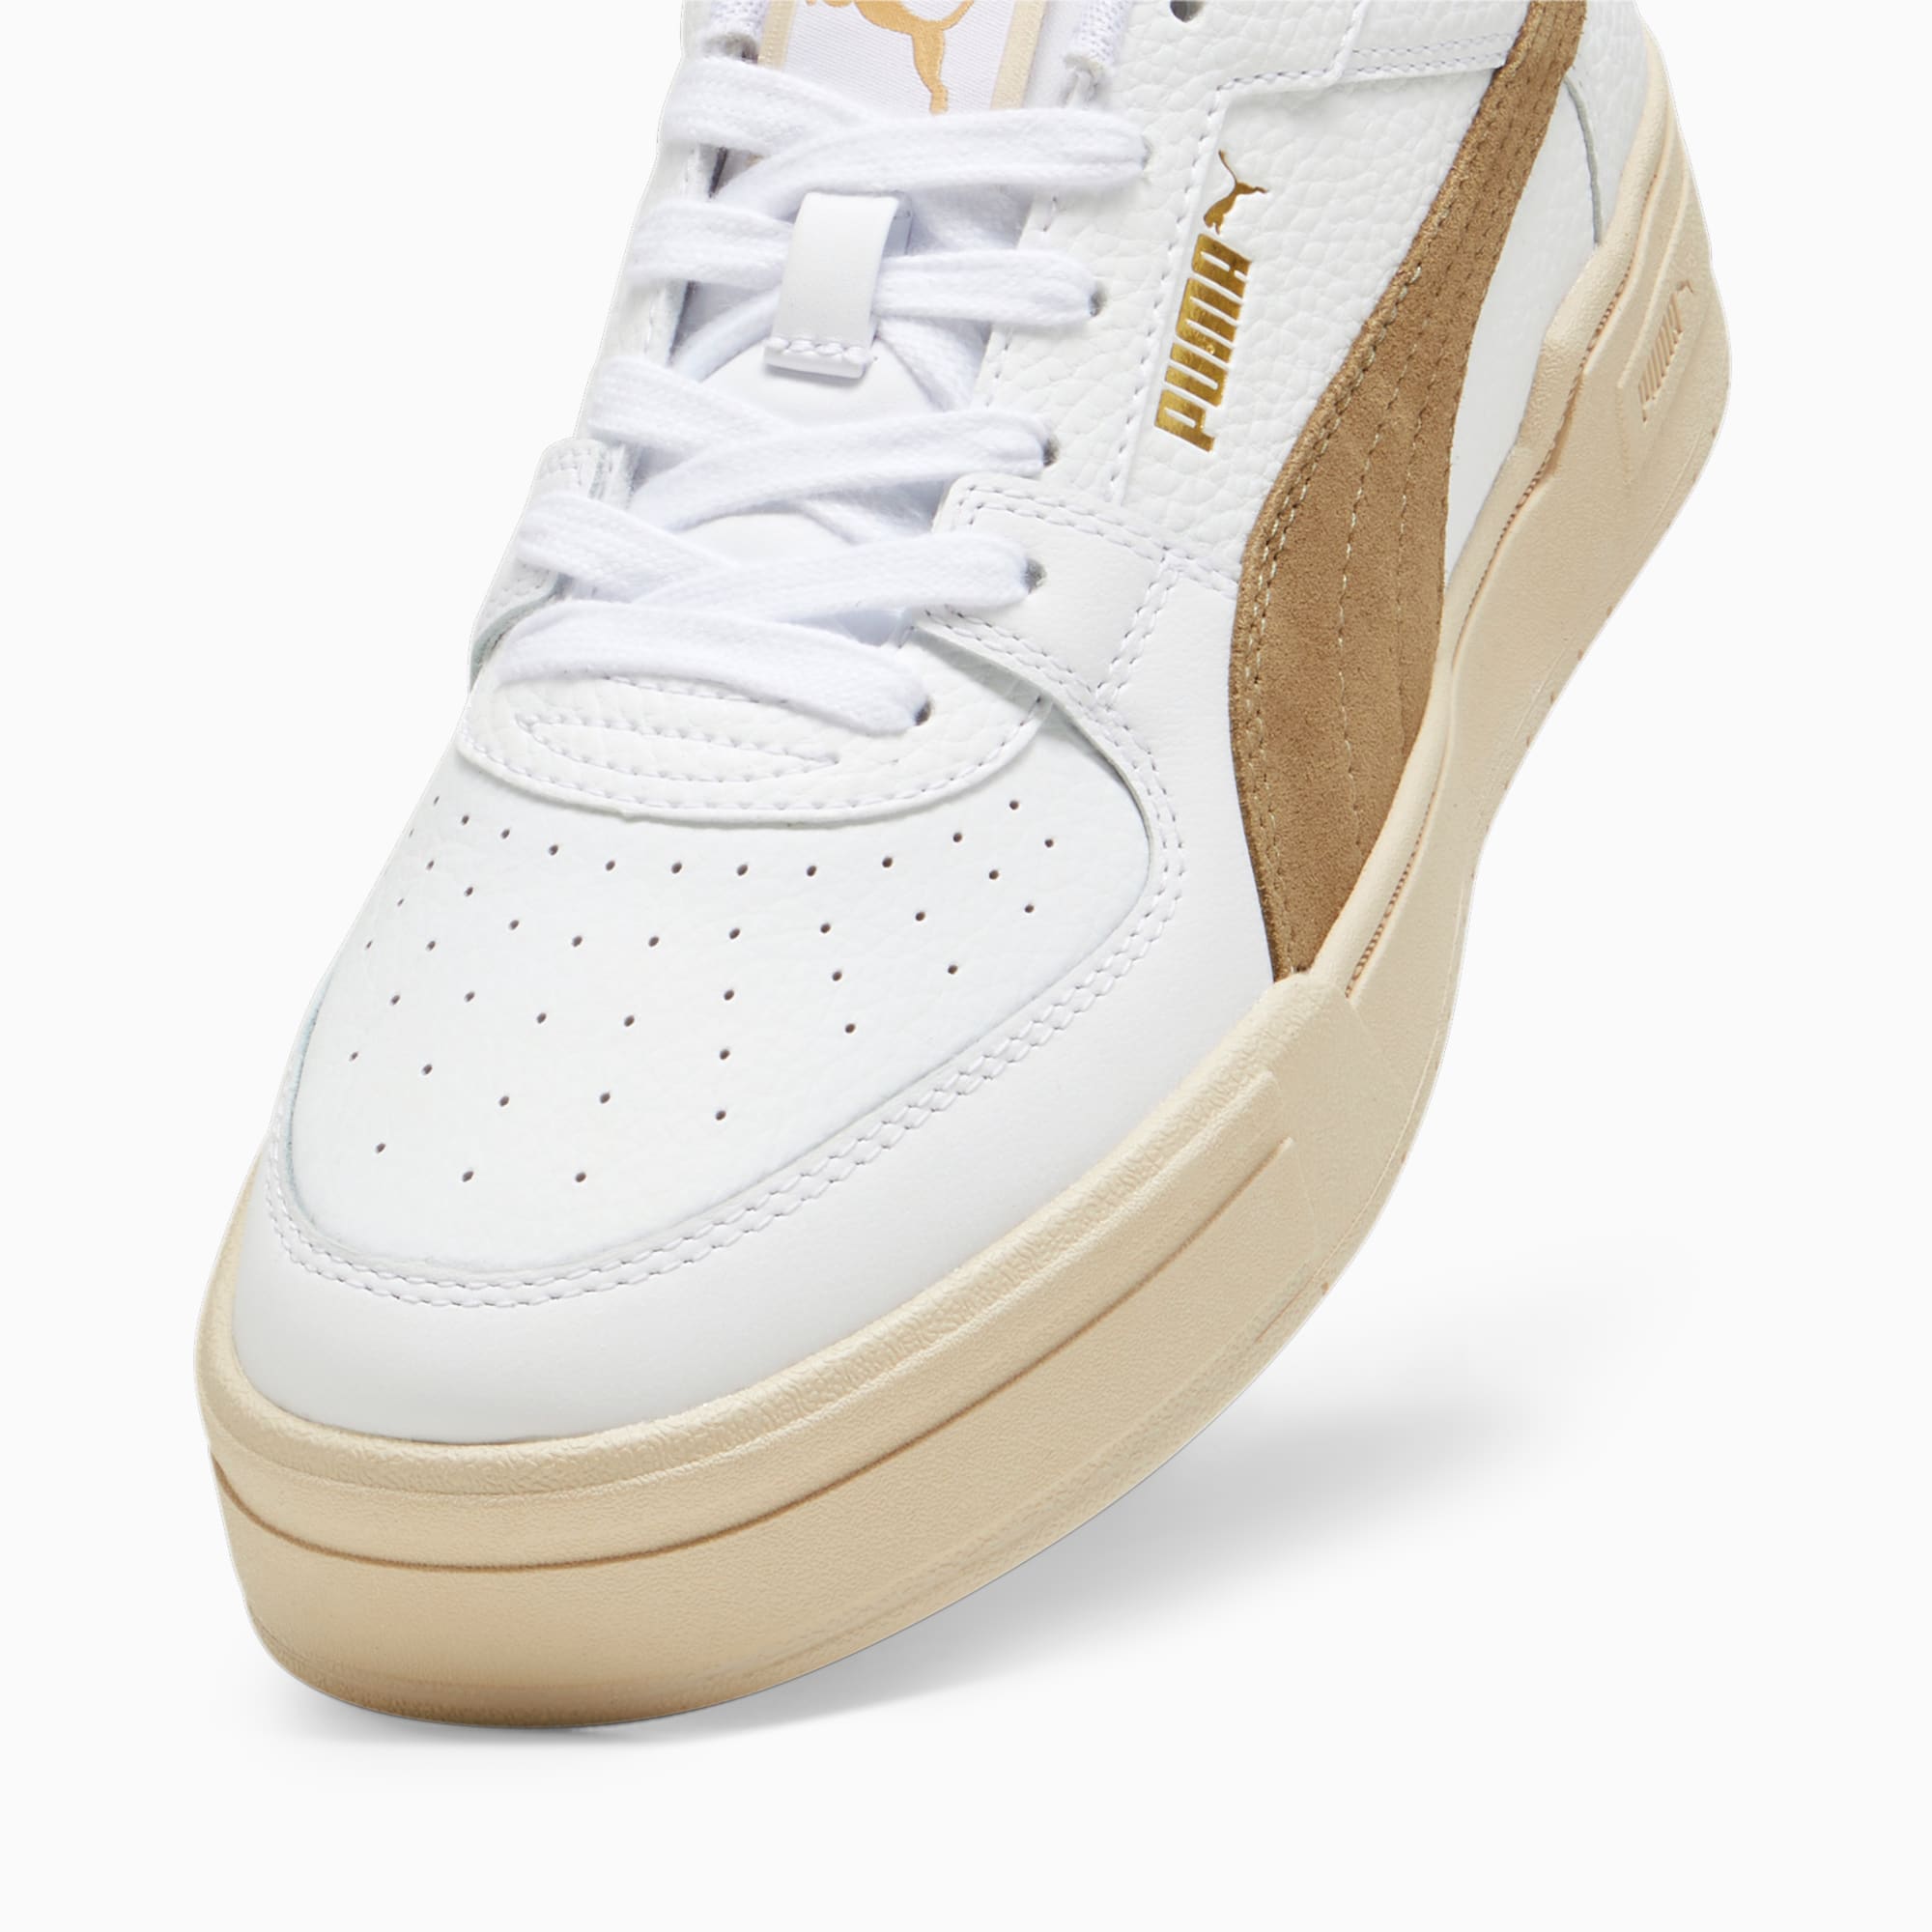 PUMA Chaussure Sneakers CA Pro OW, Blanc/Or/Marron